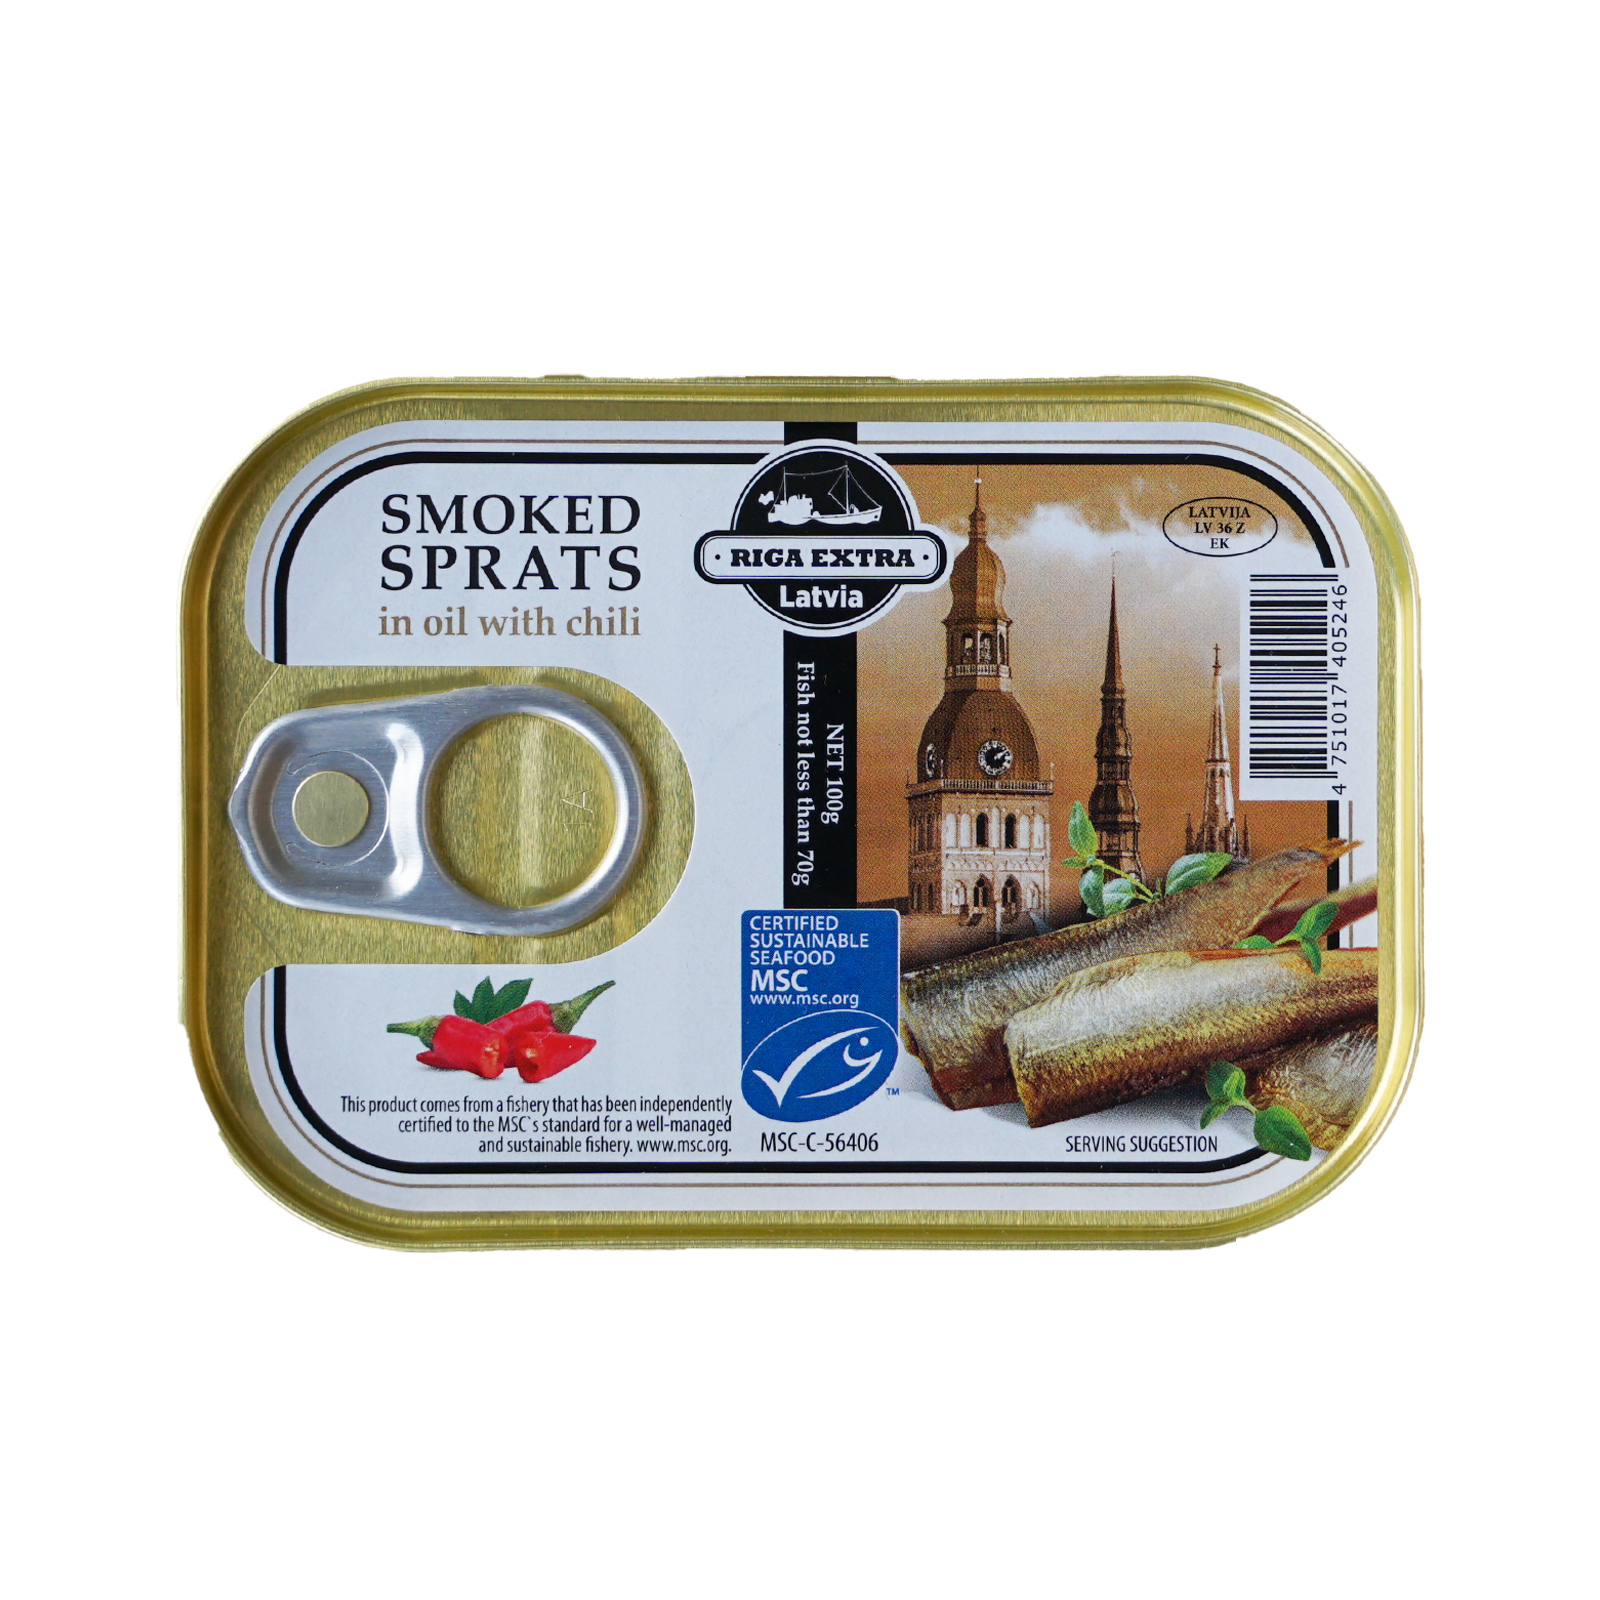 MSC Certified BPA-Free Wild-Caught Canned Smoked Sprats and Chilis in Oil (100g x 4) - Horizon Farms